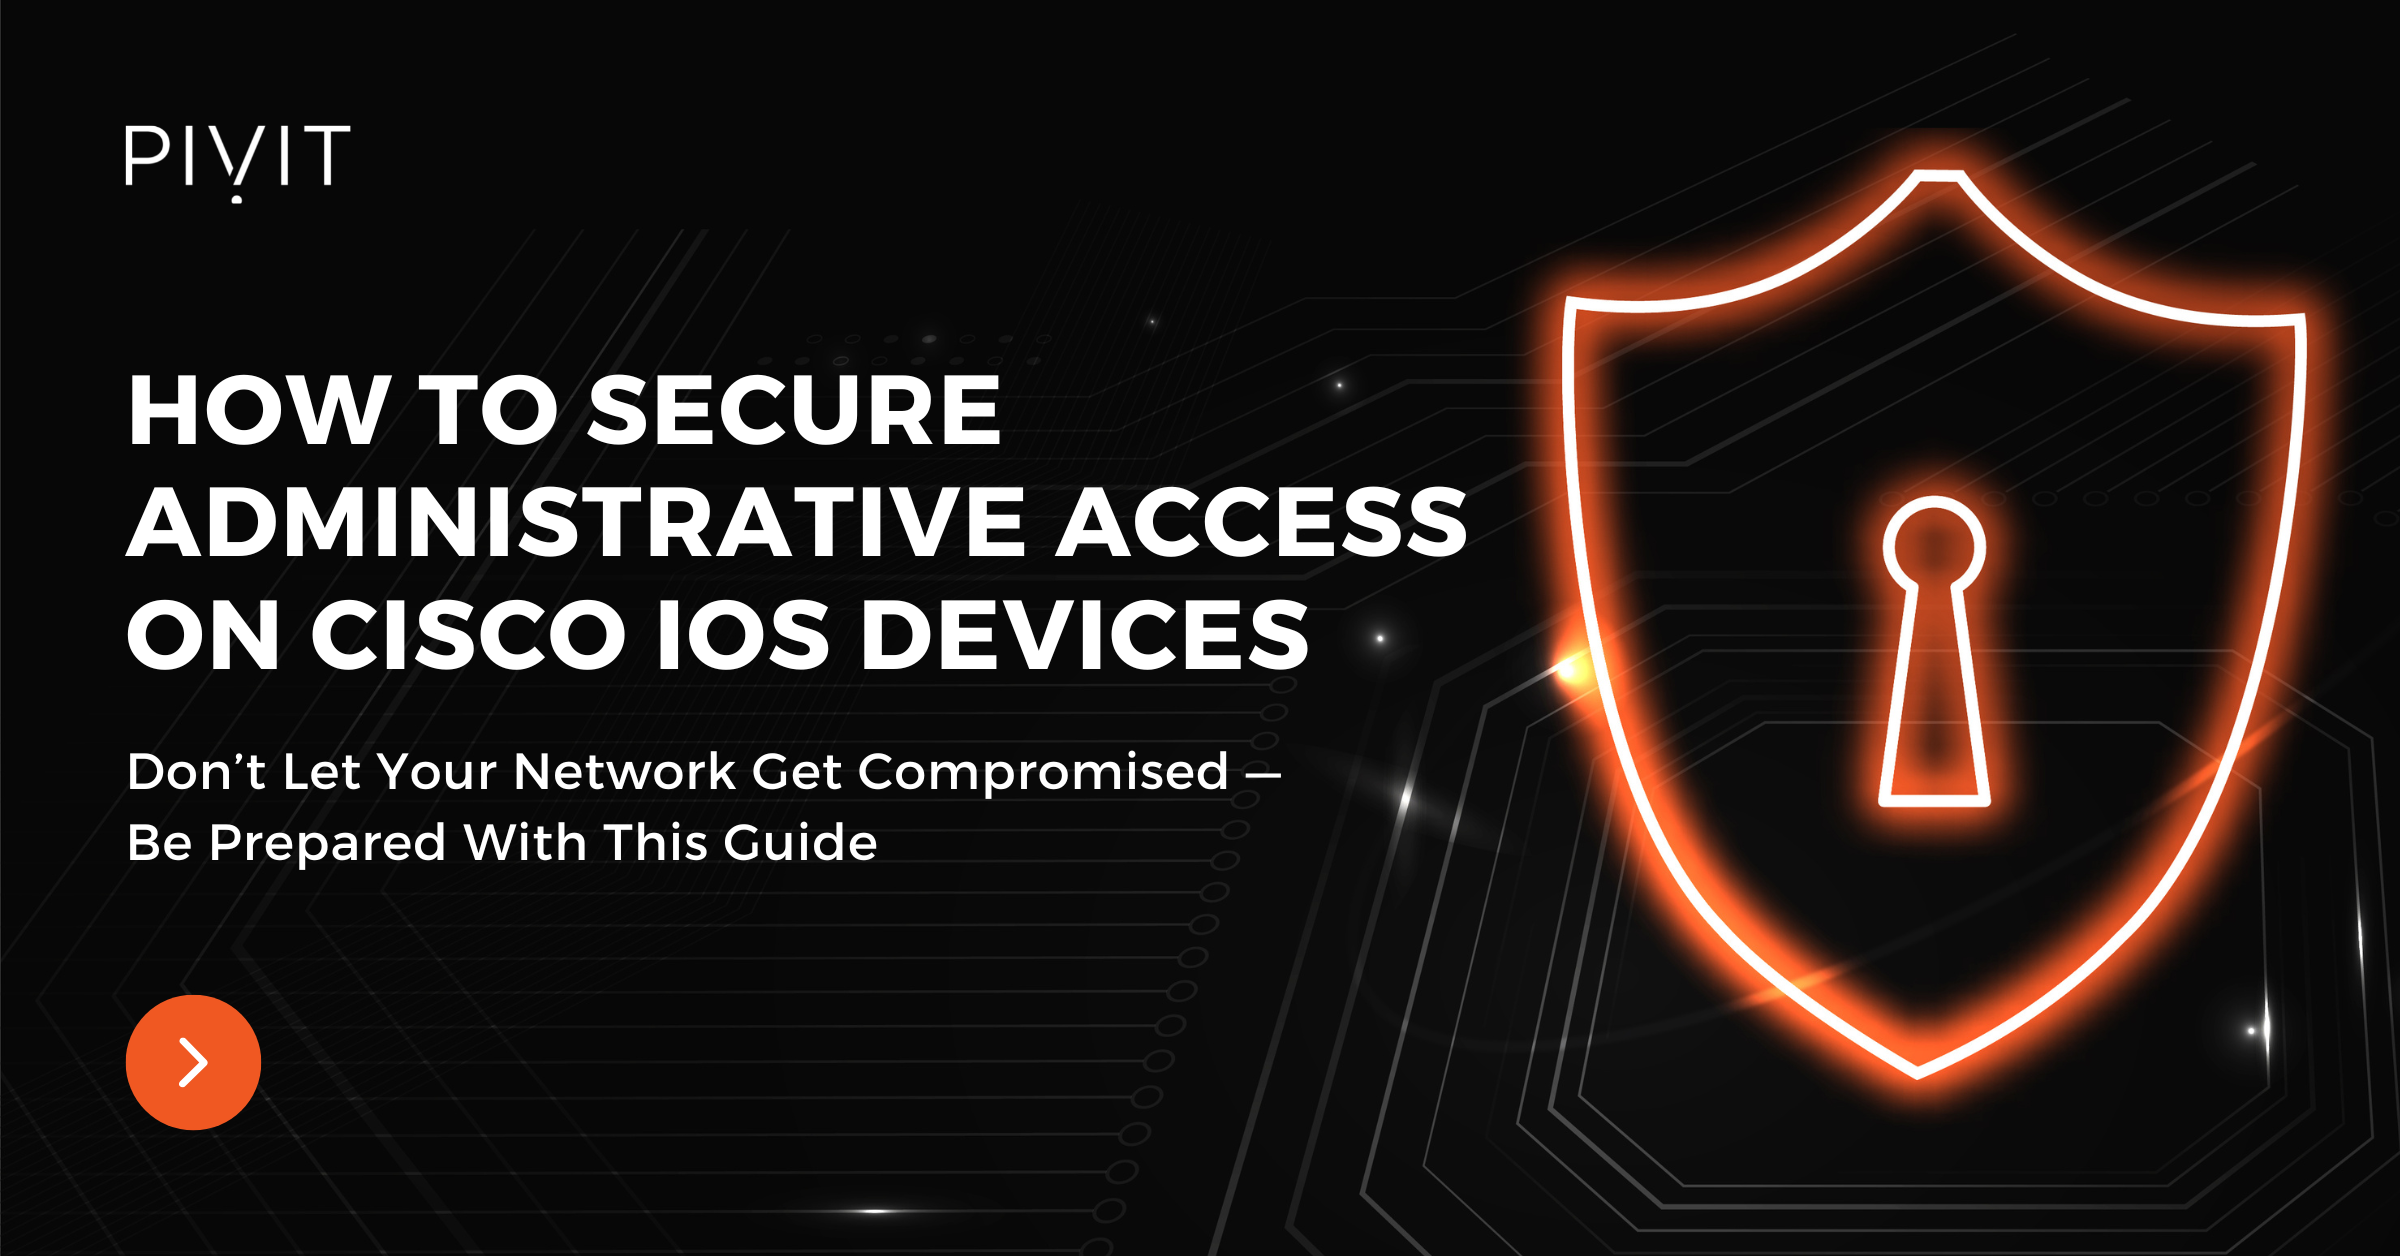 How to Secure Administrative Access on Cisco IOS Devices